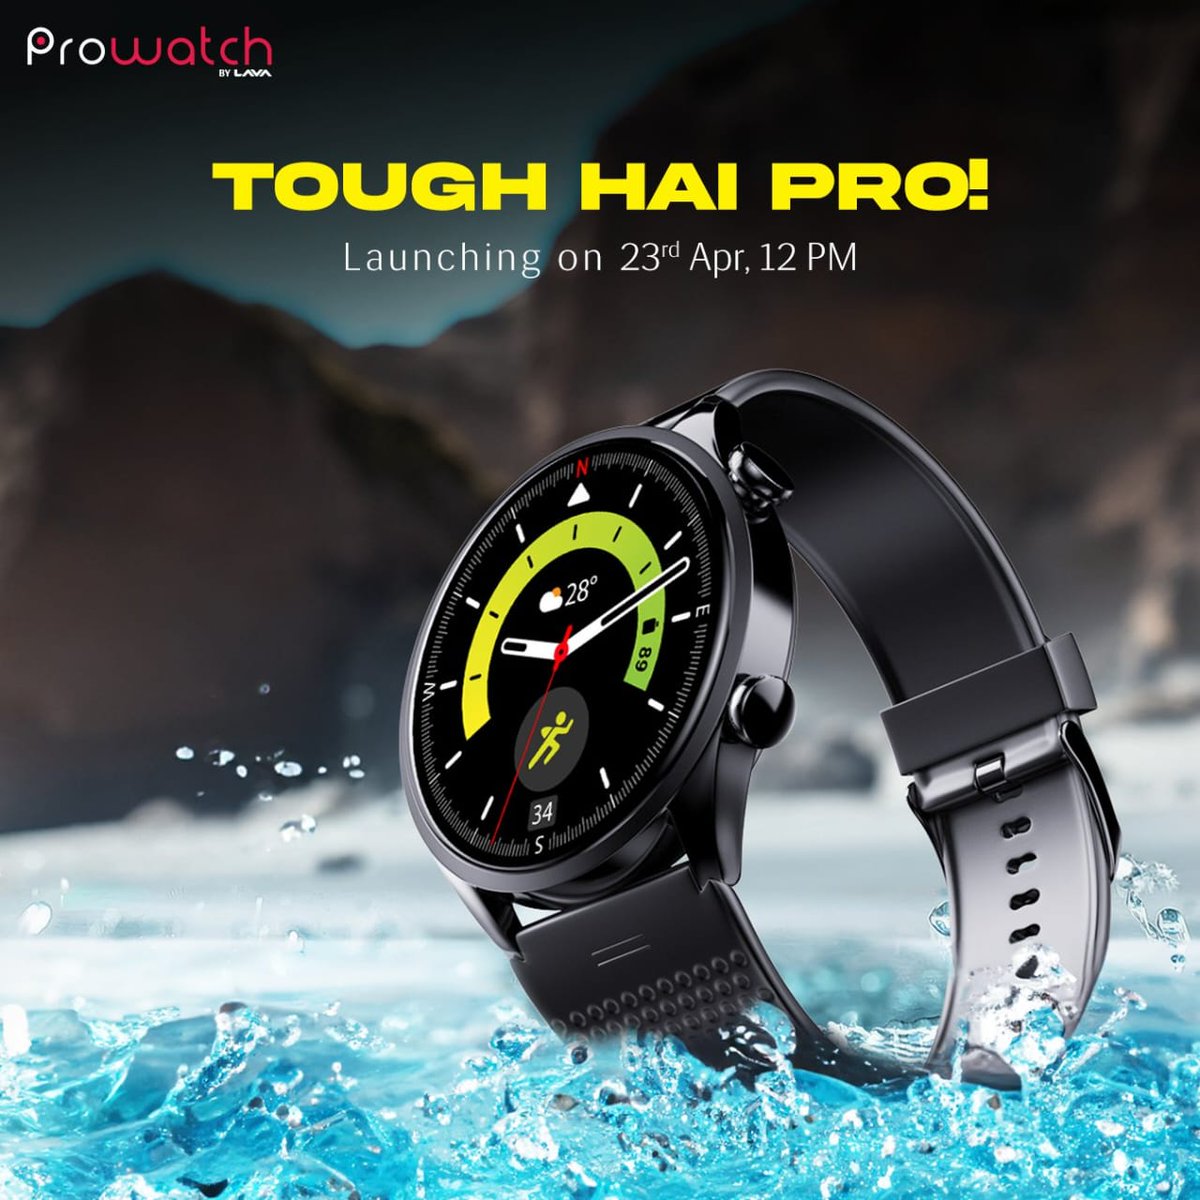 Brace yourselves, the future of smartwatches is about to arrive. #ProwatchLaunchTomorrow